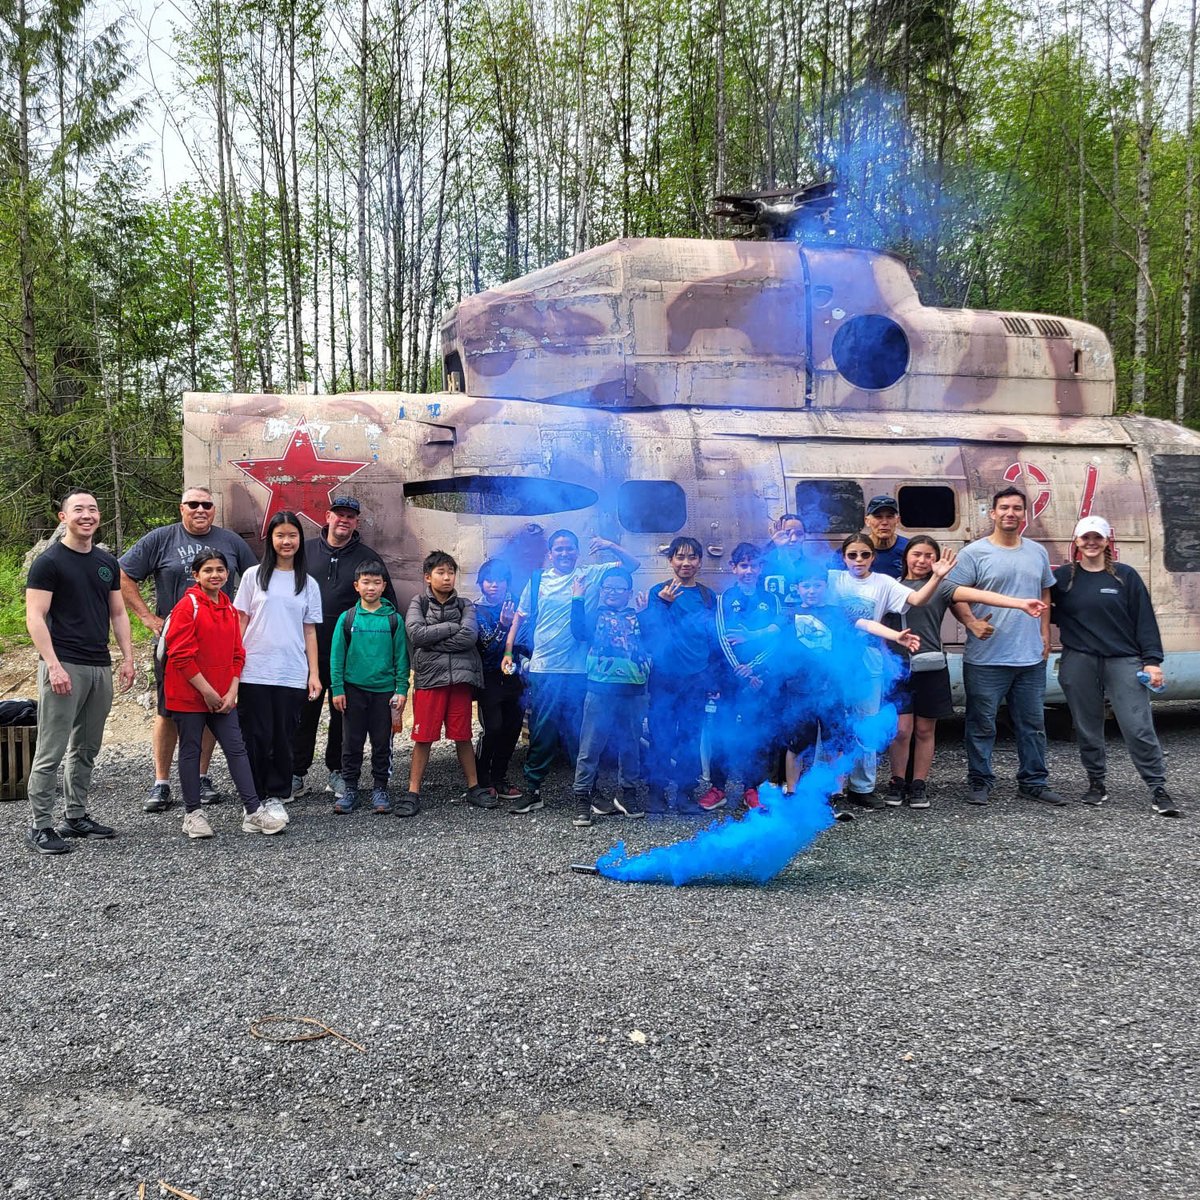 The #SurreyBC Blue Eagle Community Cadets had their turn at Delta Force Paintball to practice their teamwork skills while taking part in an action-packed battle. Special thank you @TransitMuseumBC for getting us all there and back!